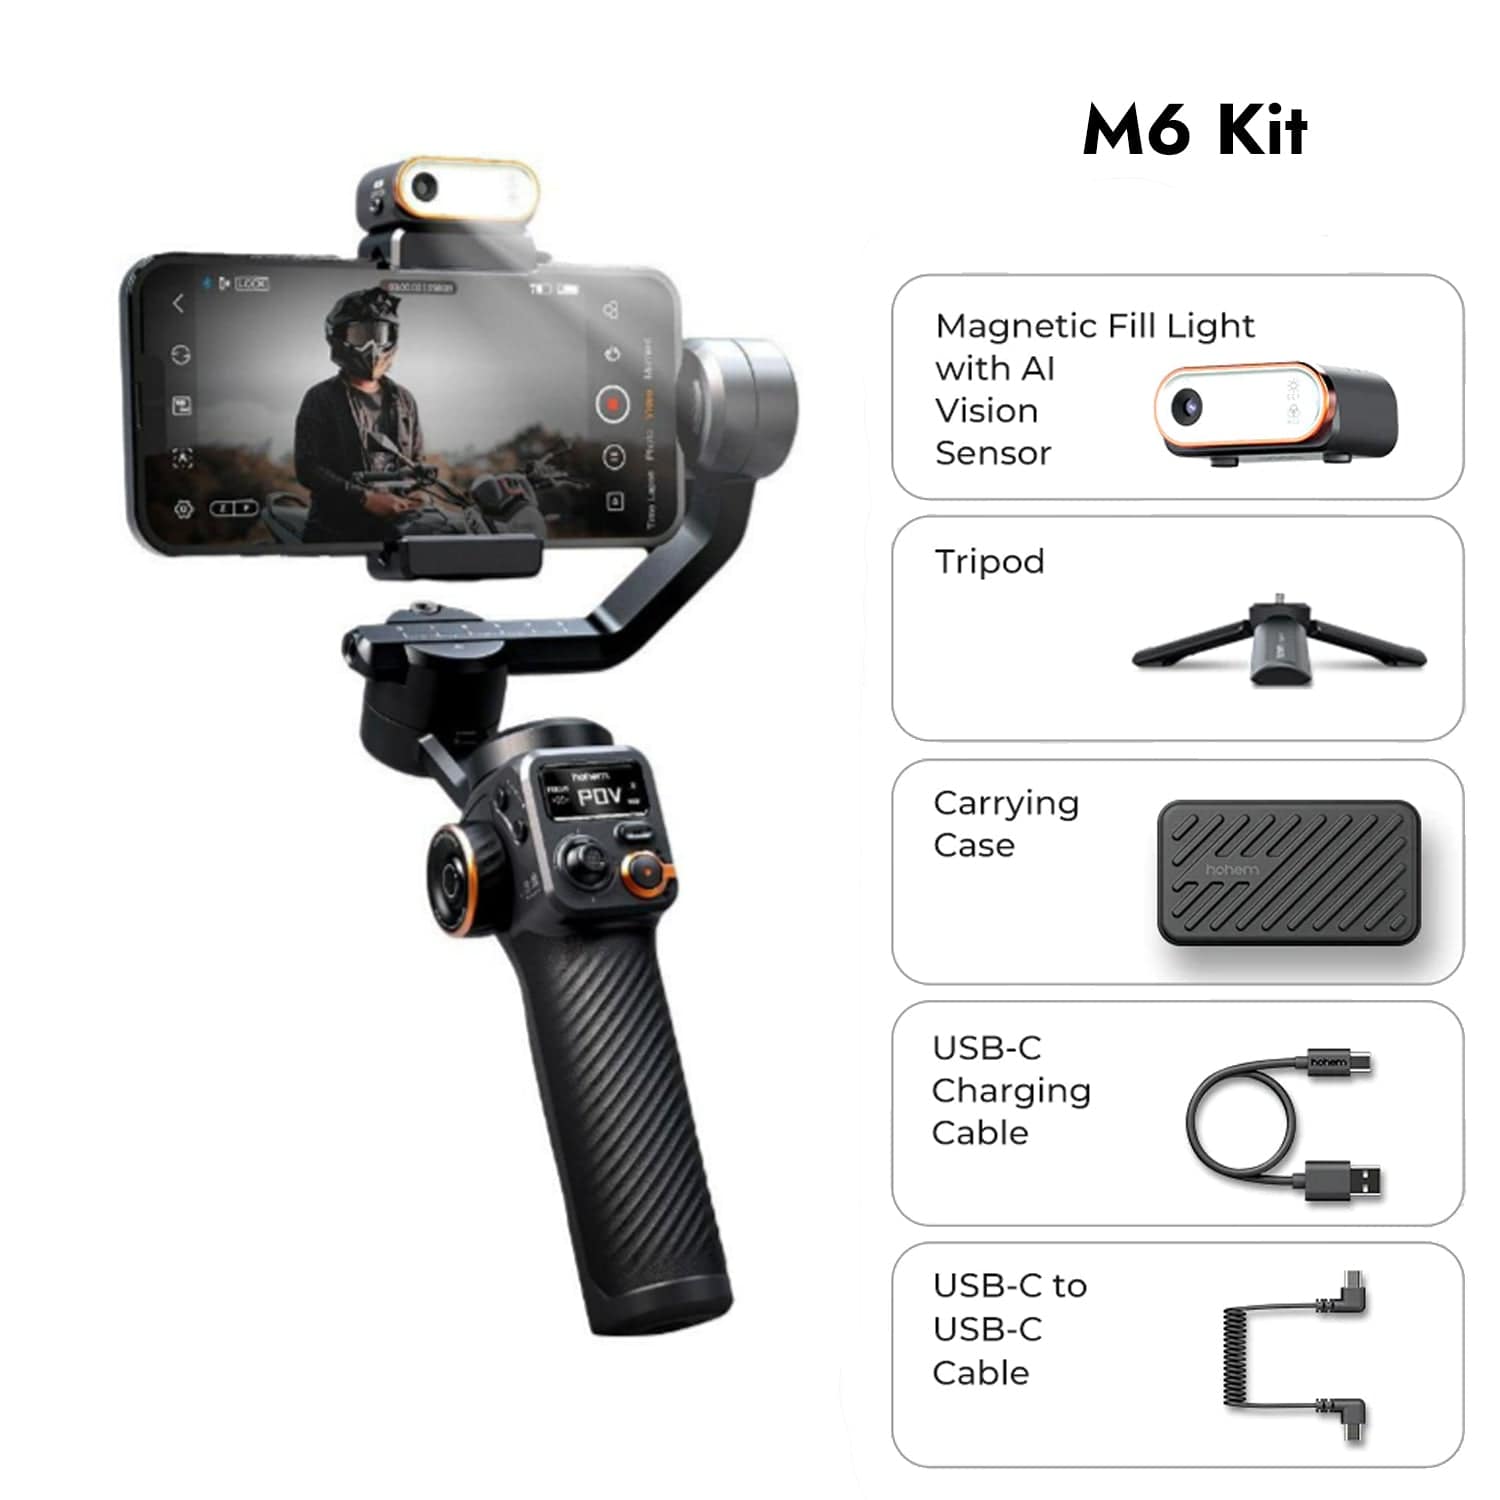 Hohem iSteady M6 Kit 3-Axis Gimbal Stabilizer AI Magnetic Fill Light  Smartphone